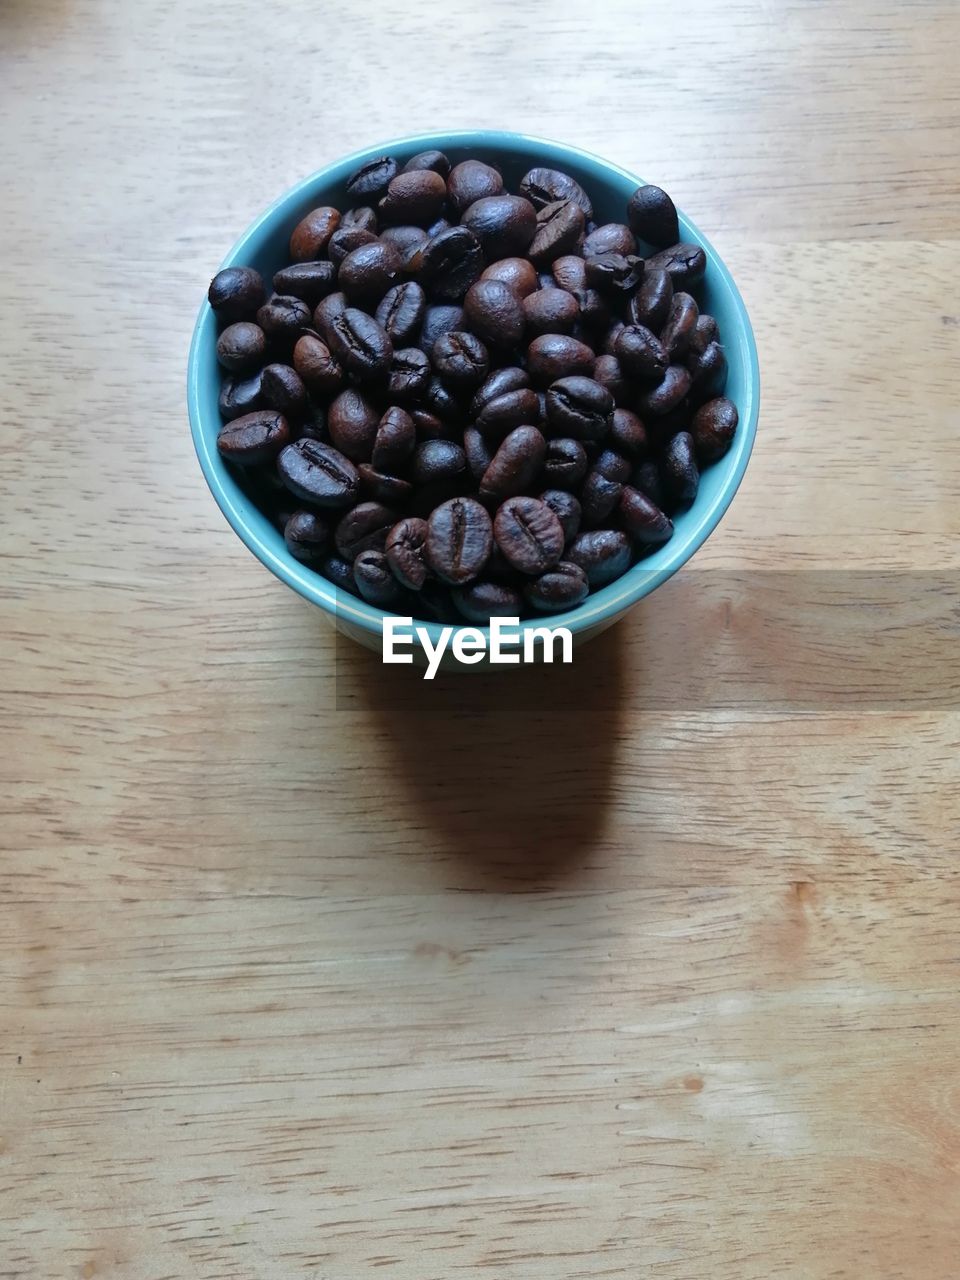 HIGH ANGLE VIEW OF COFFEE BEANS IN BOWL